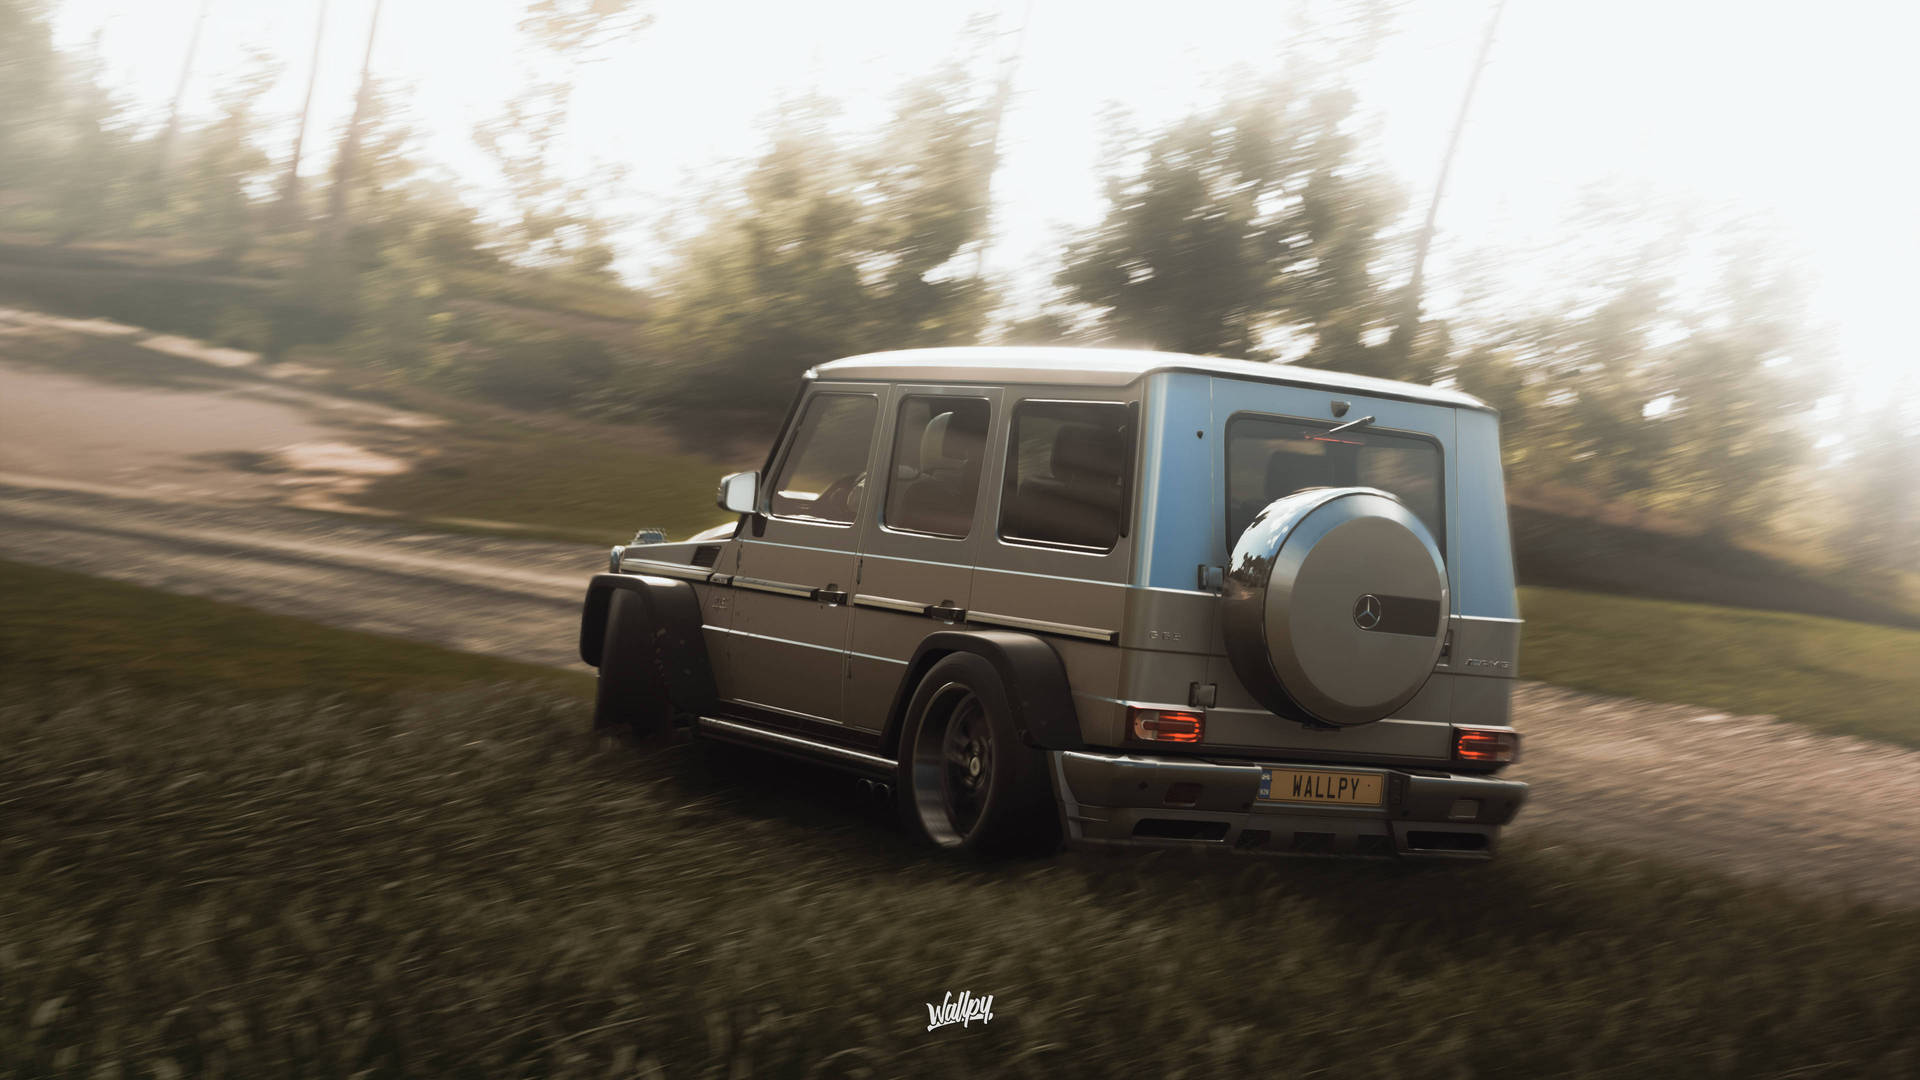 Forza 4 Shows Gray Mercedes G Wagon Background